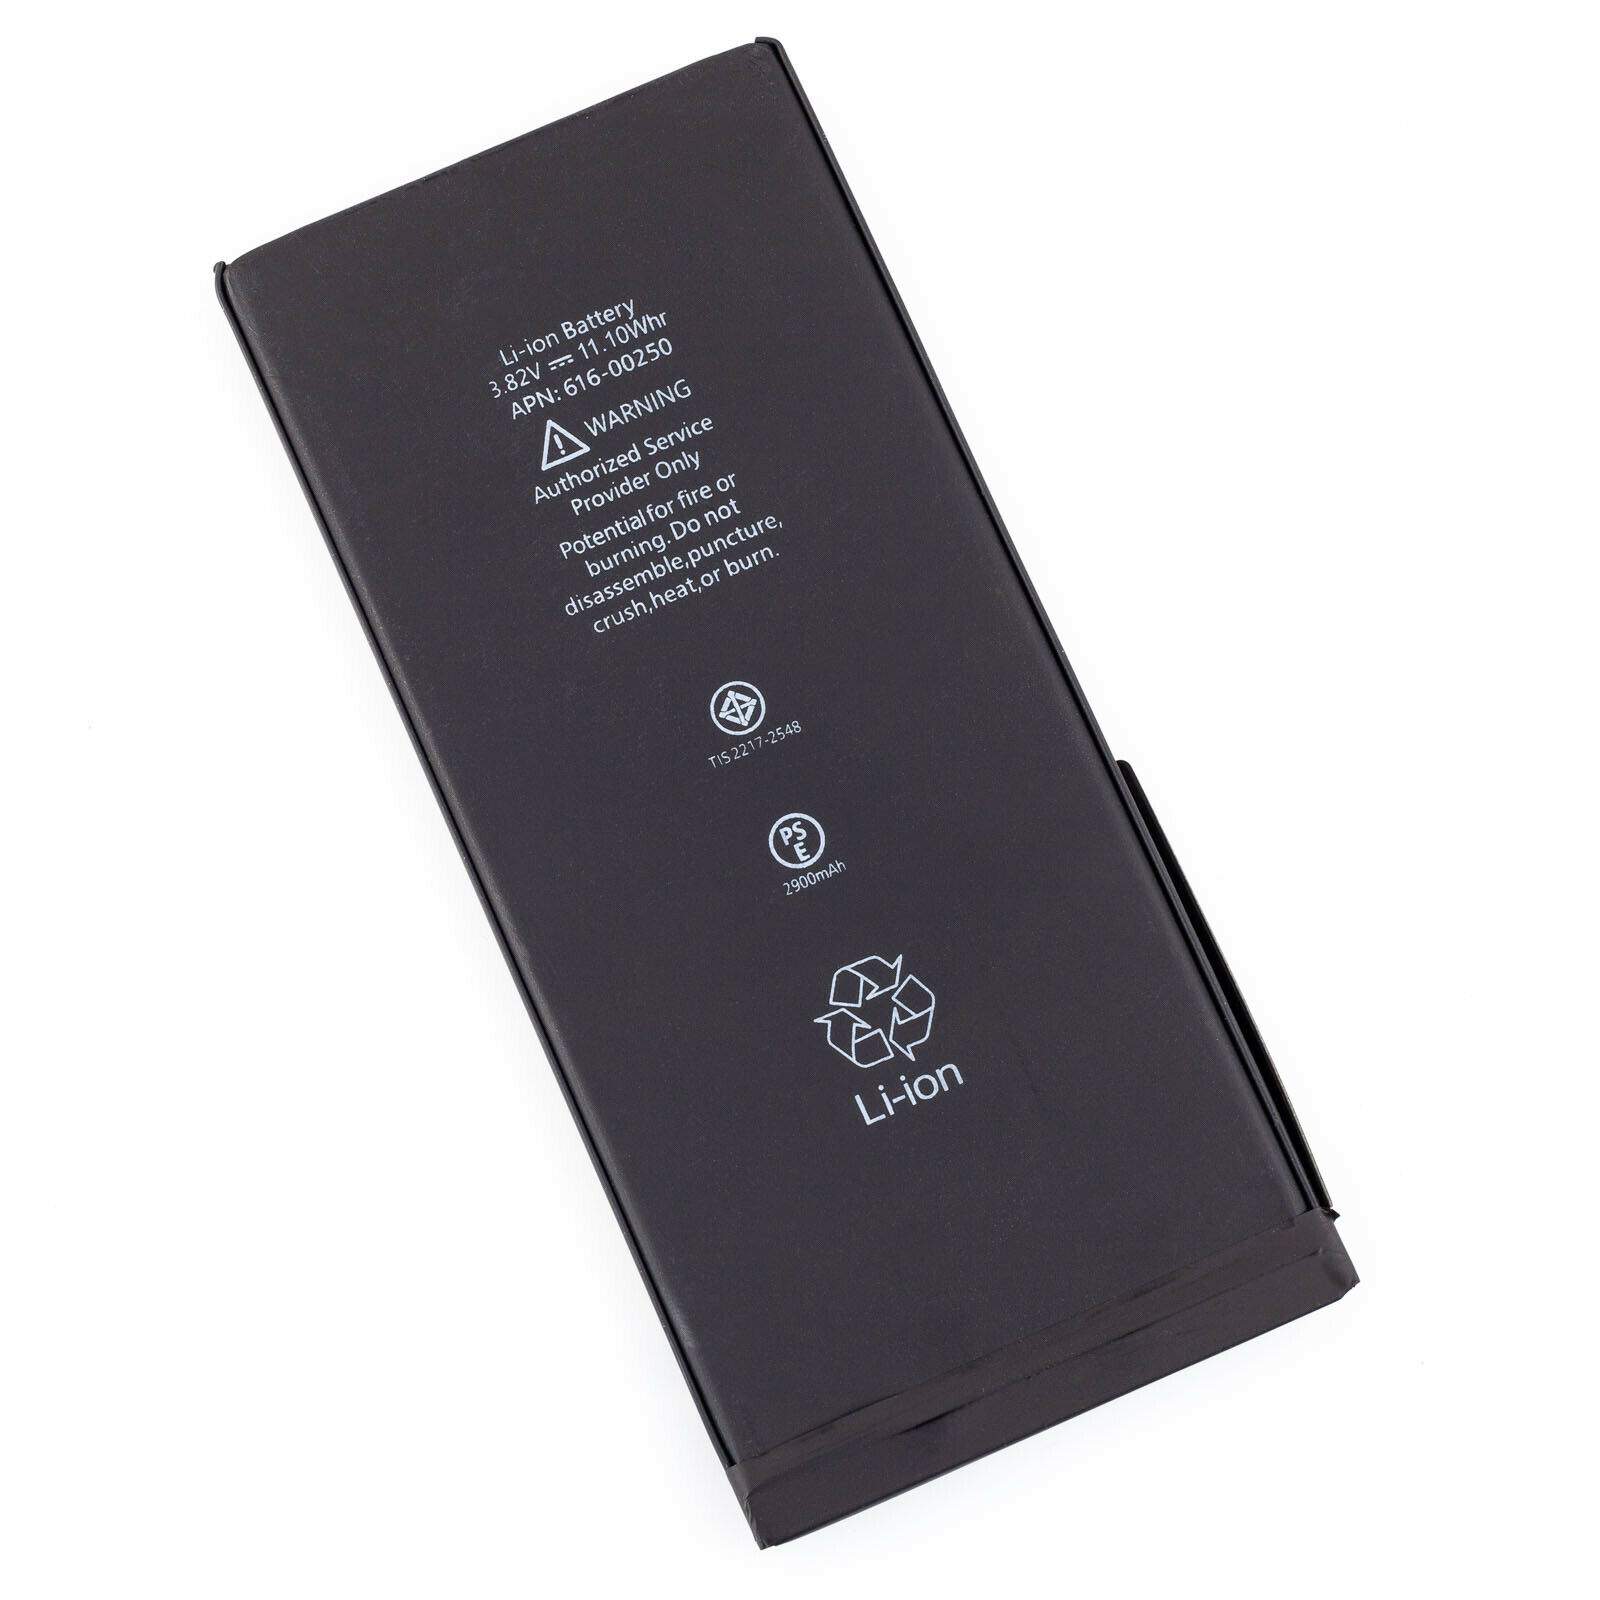 APPLE 616-00249 3.82V 2900mAh/11.1WH Replacement Battery